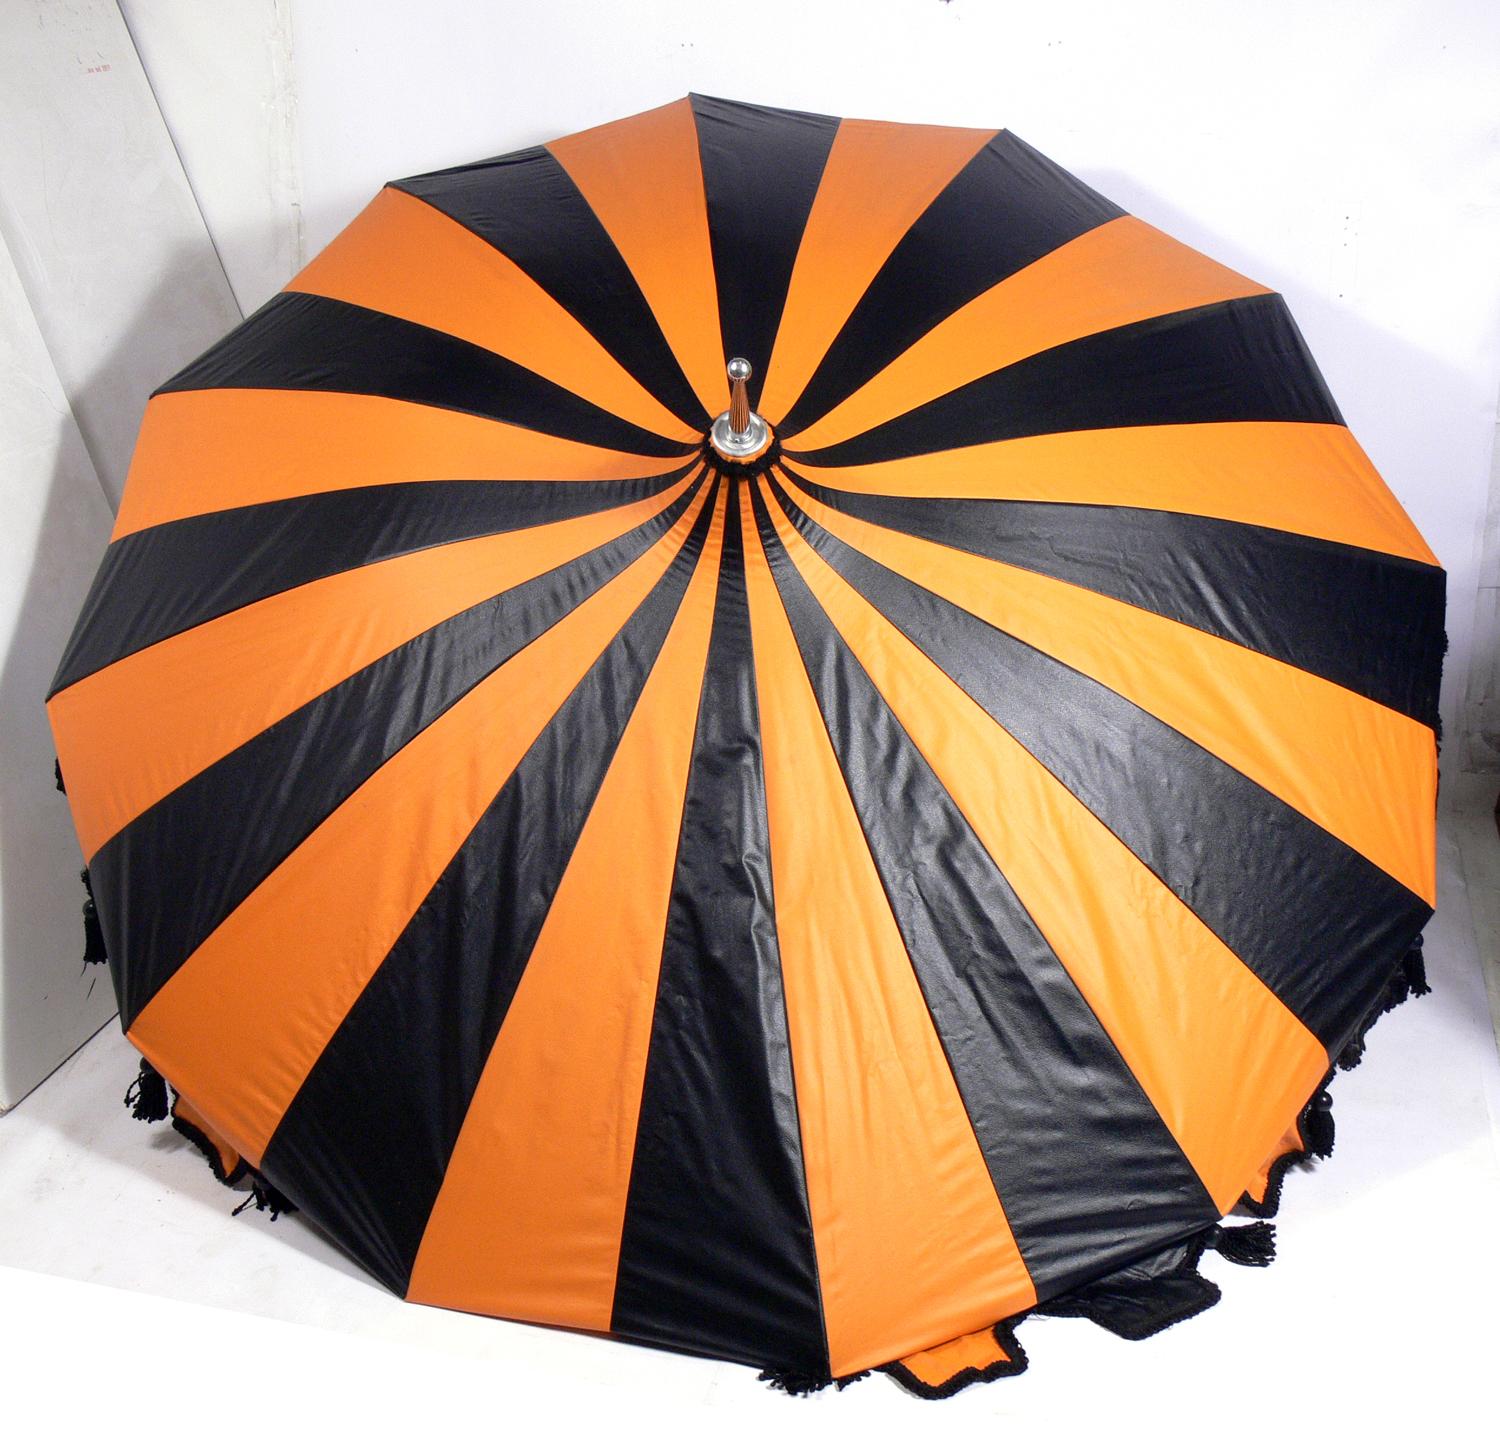 Incredible midcentury patio umbrella, made by Sun Master of California, American, circa 1950s. Appears to be rarely used. Crank functions smoothly. Retains original cover.